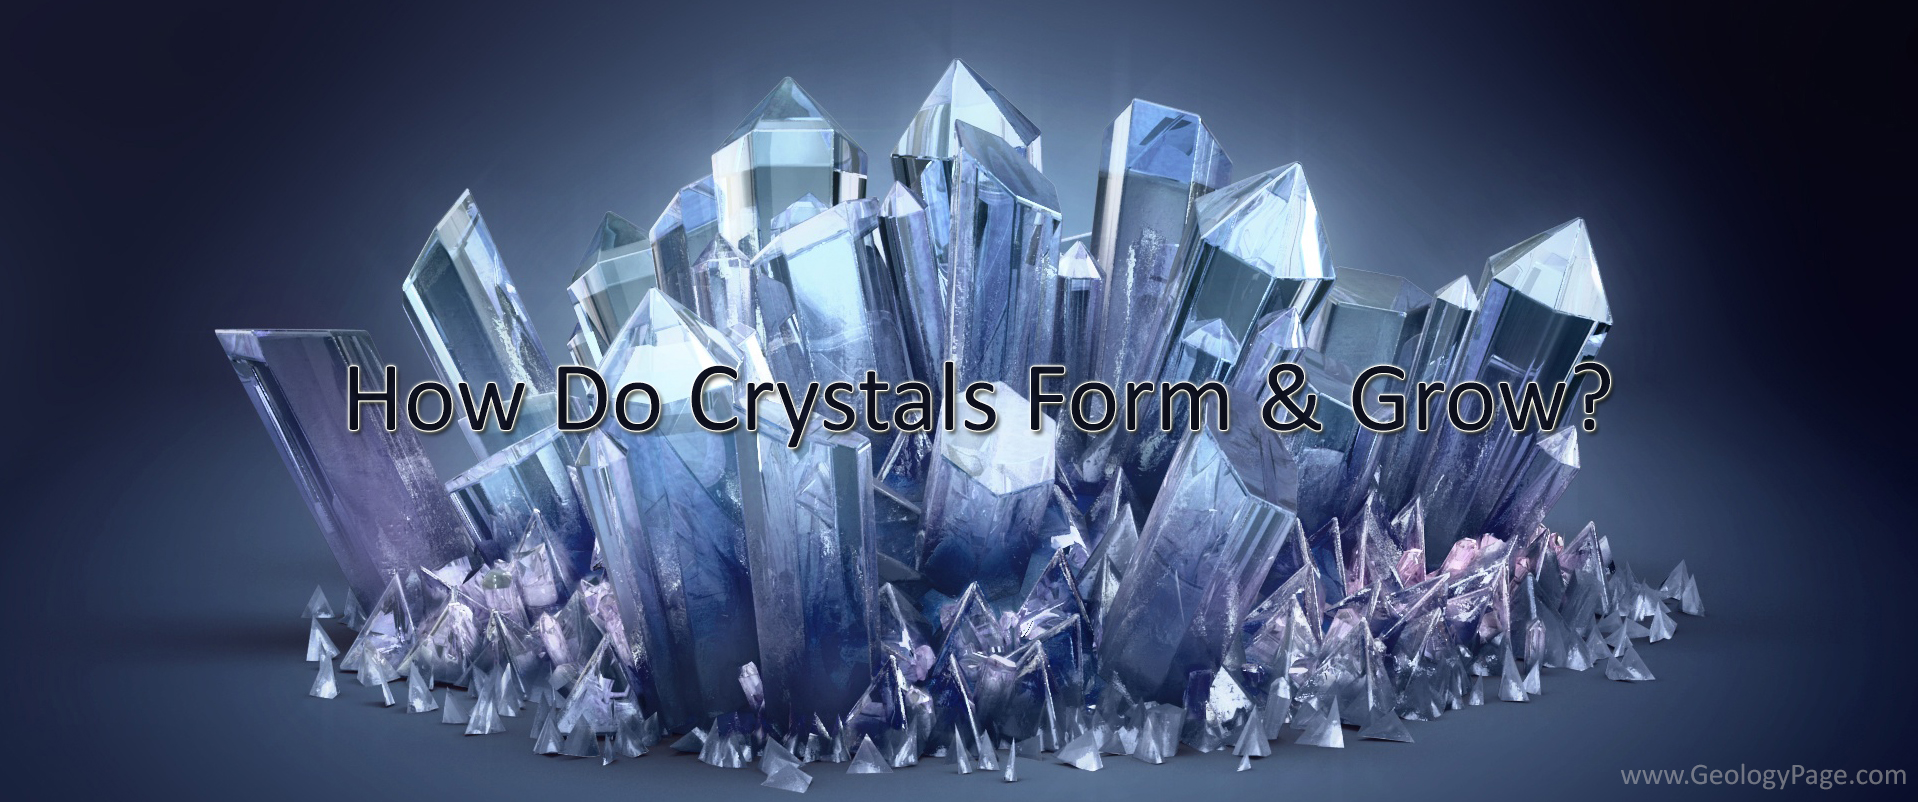 Banquet Absolute Ridiculous How Do Crystals Form & Grow? | Geology Page